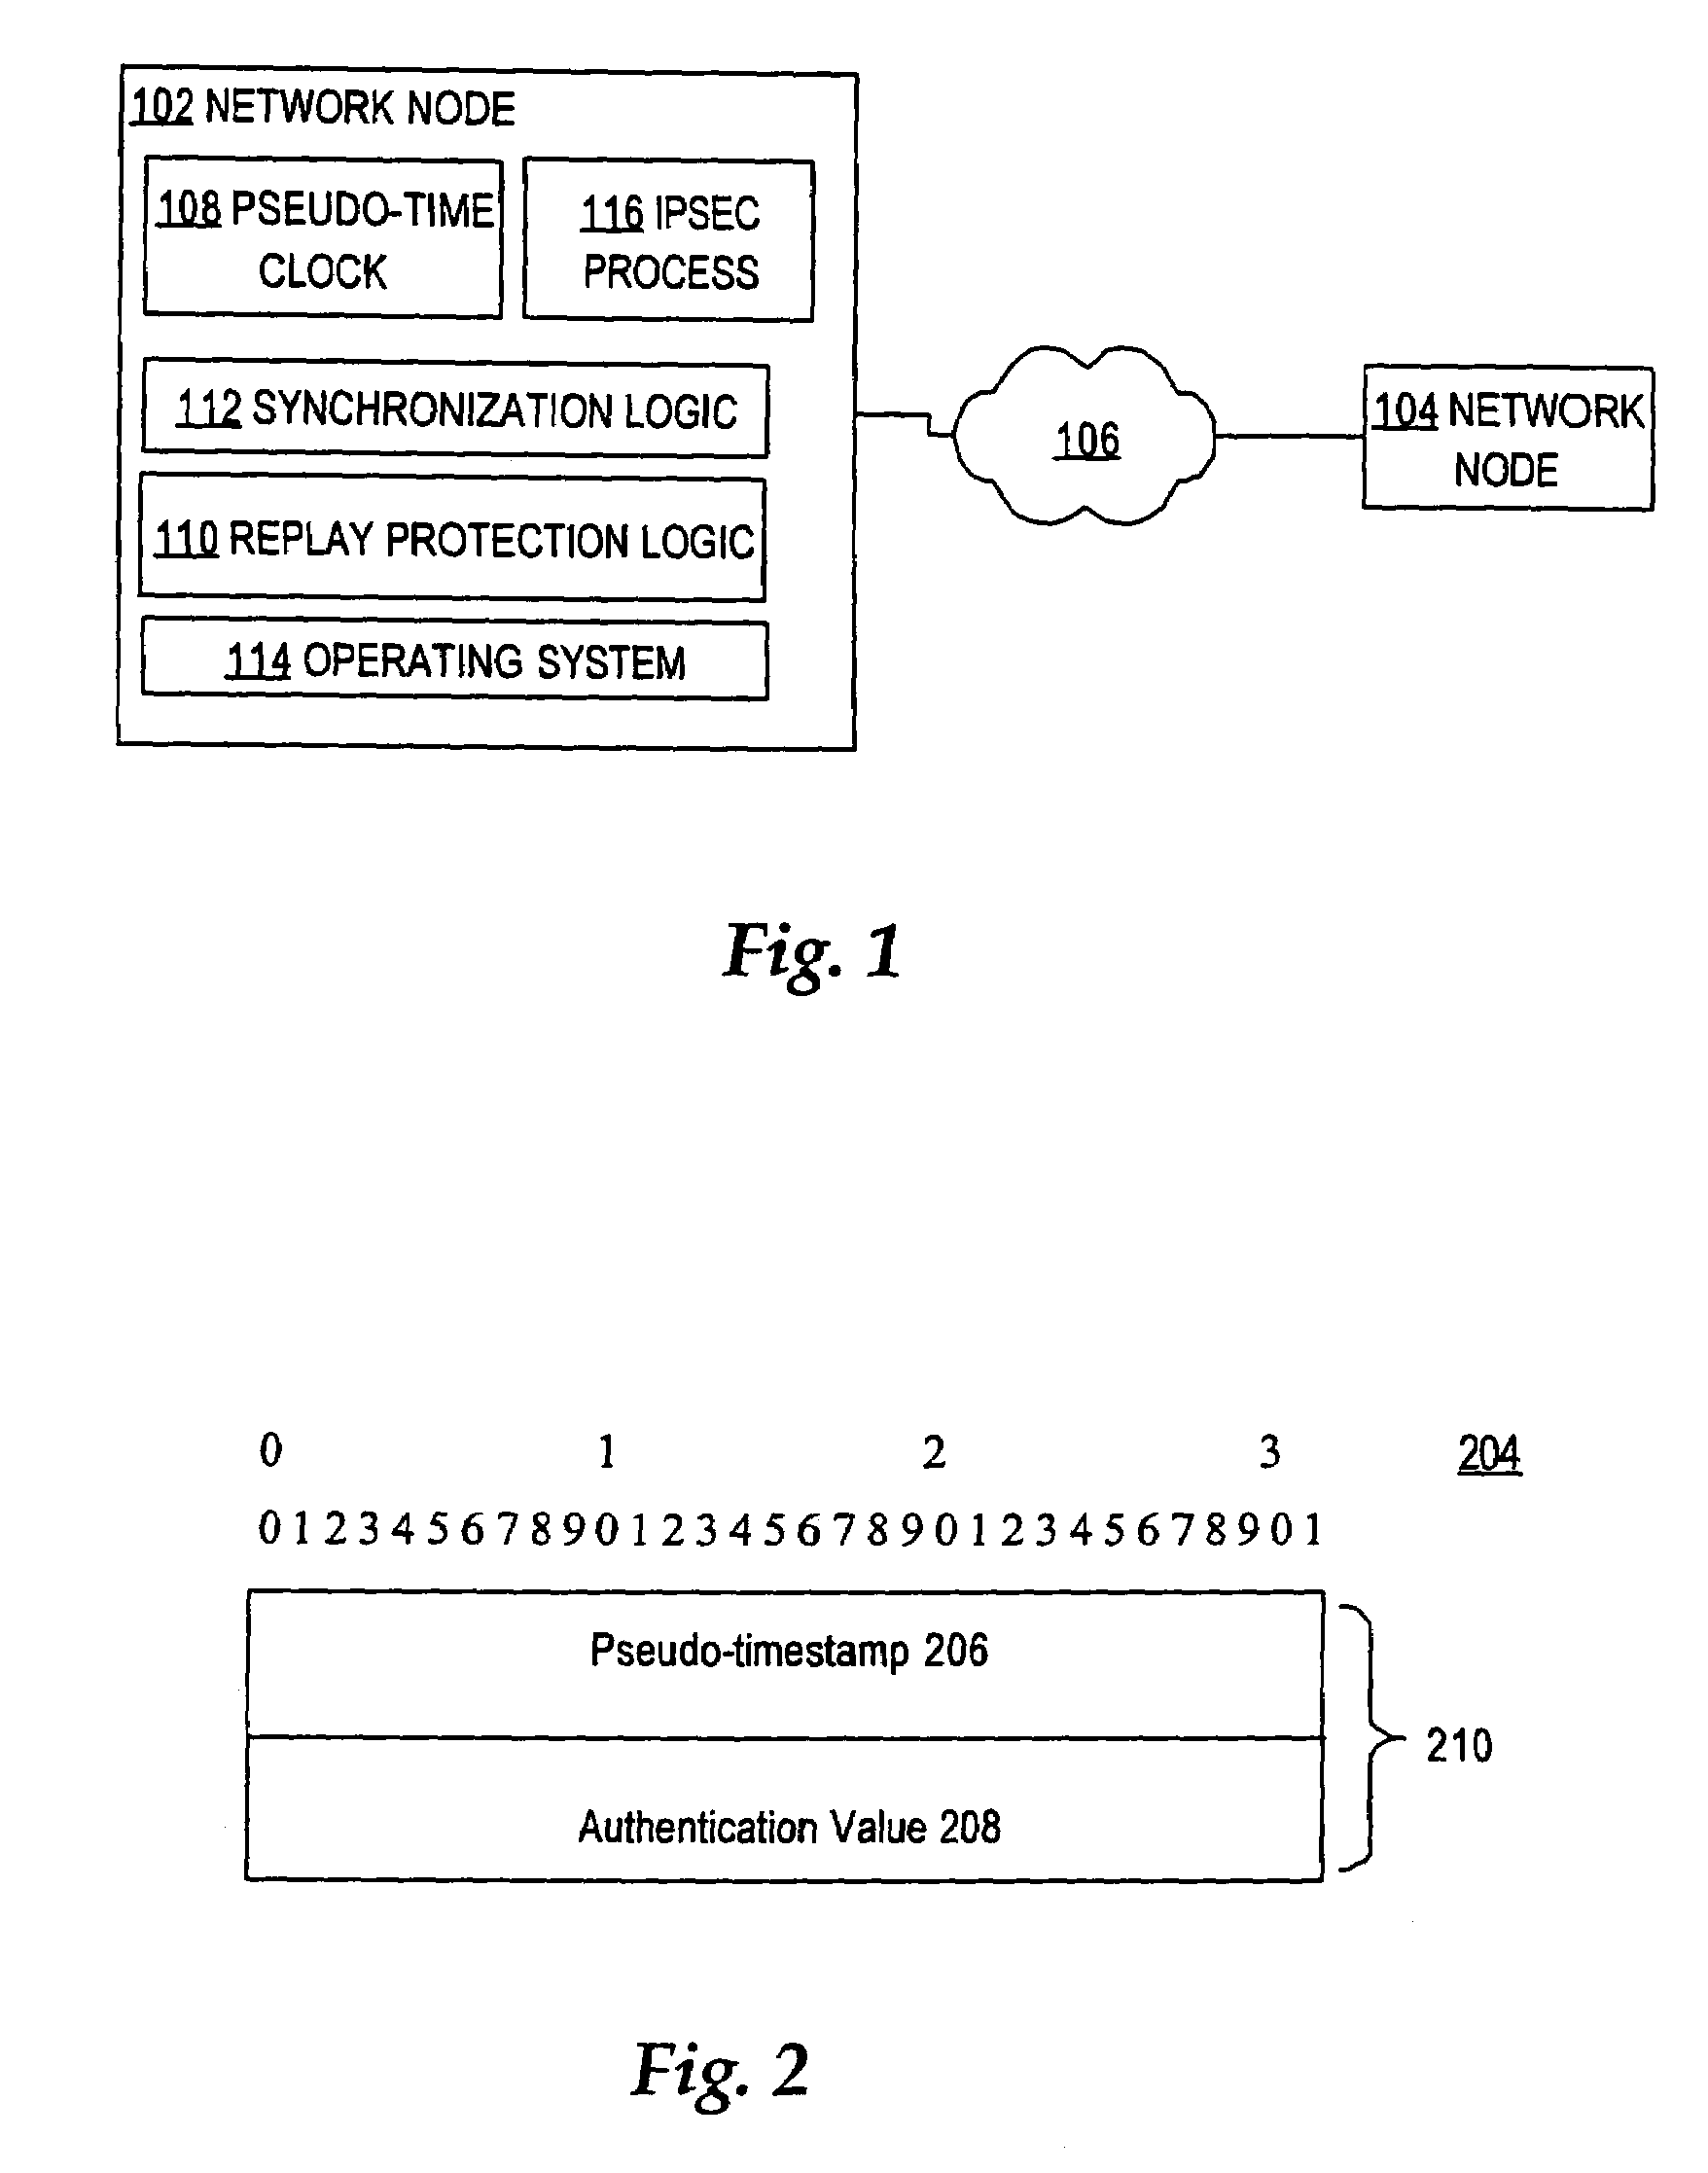 Method for self-synchronizing time between communicating networked systems using timestamps